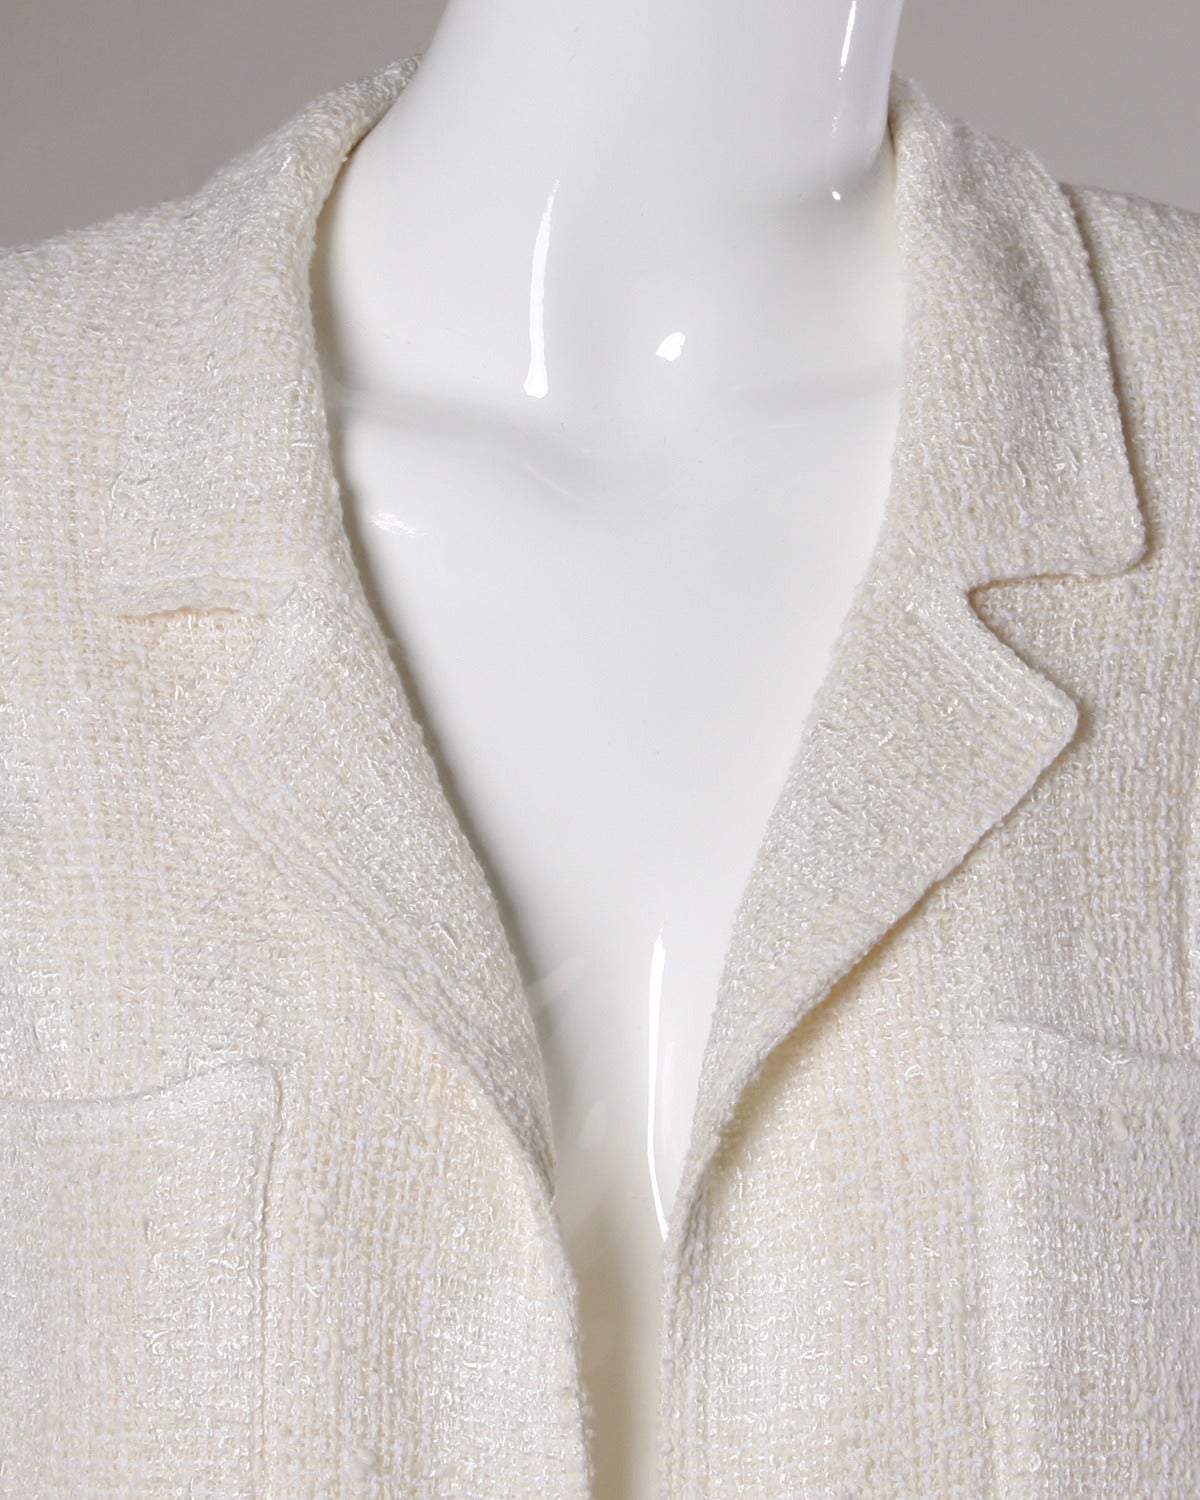 Recent ivory woven cotton Chanel jacket with metal chain detail. Beautiful clean tailoring with all the class and quality you expect from Chanel. Light weight woven lining.

Details:

Unlined
Front Pockets
Thin Shoulder Pads Are Sewn Into